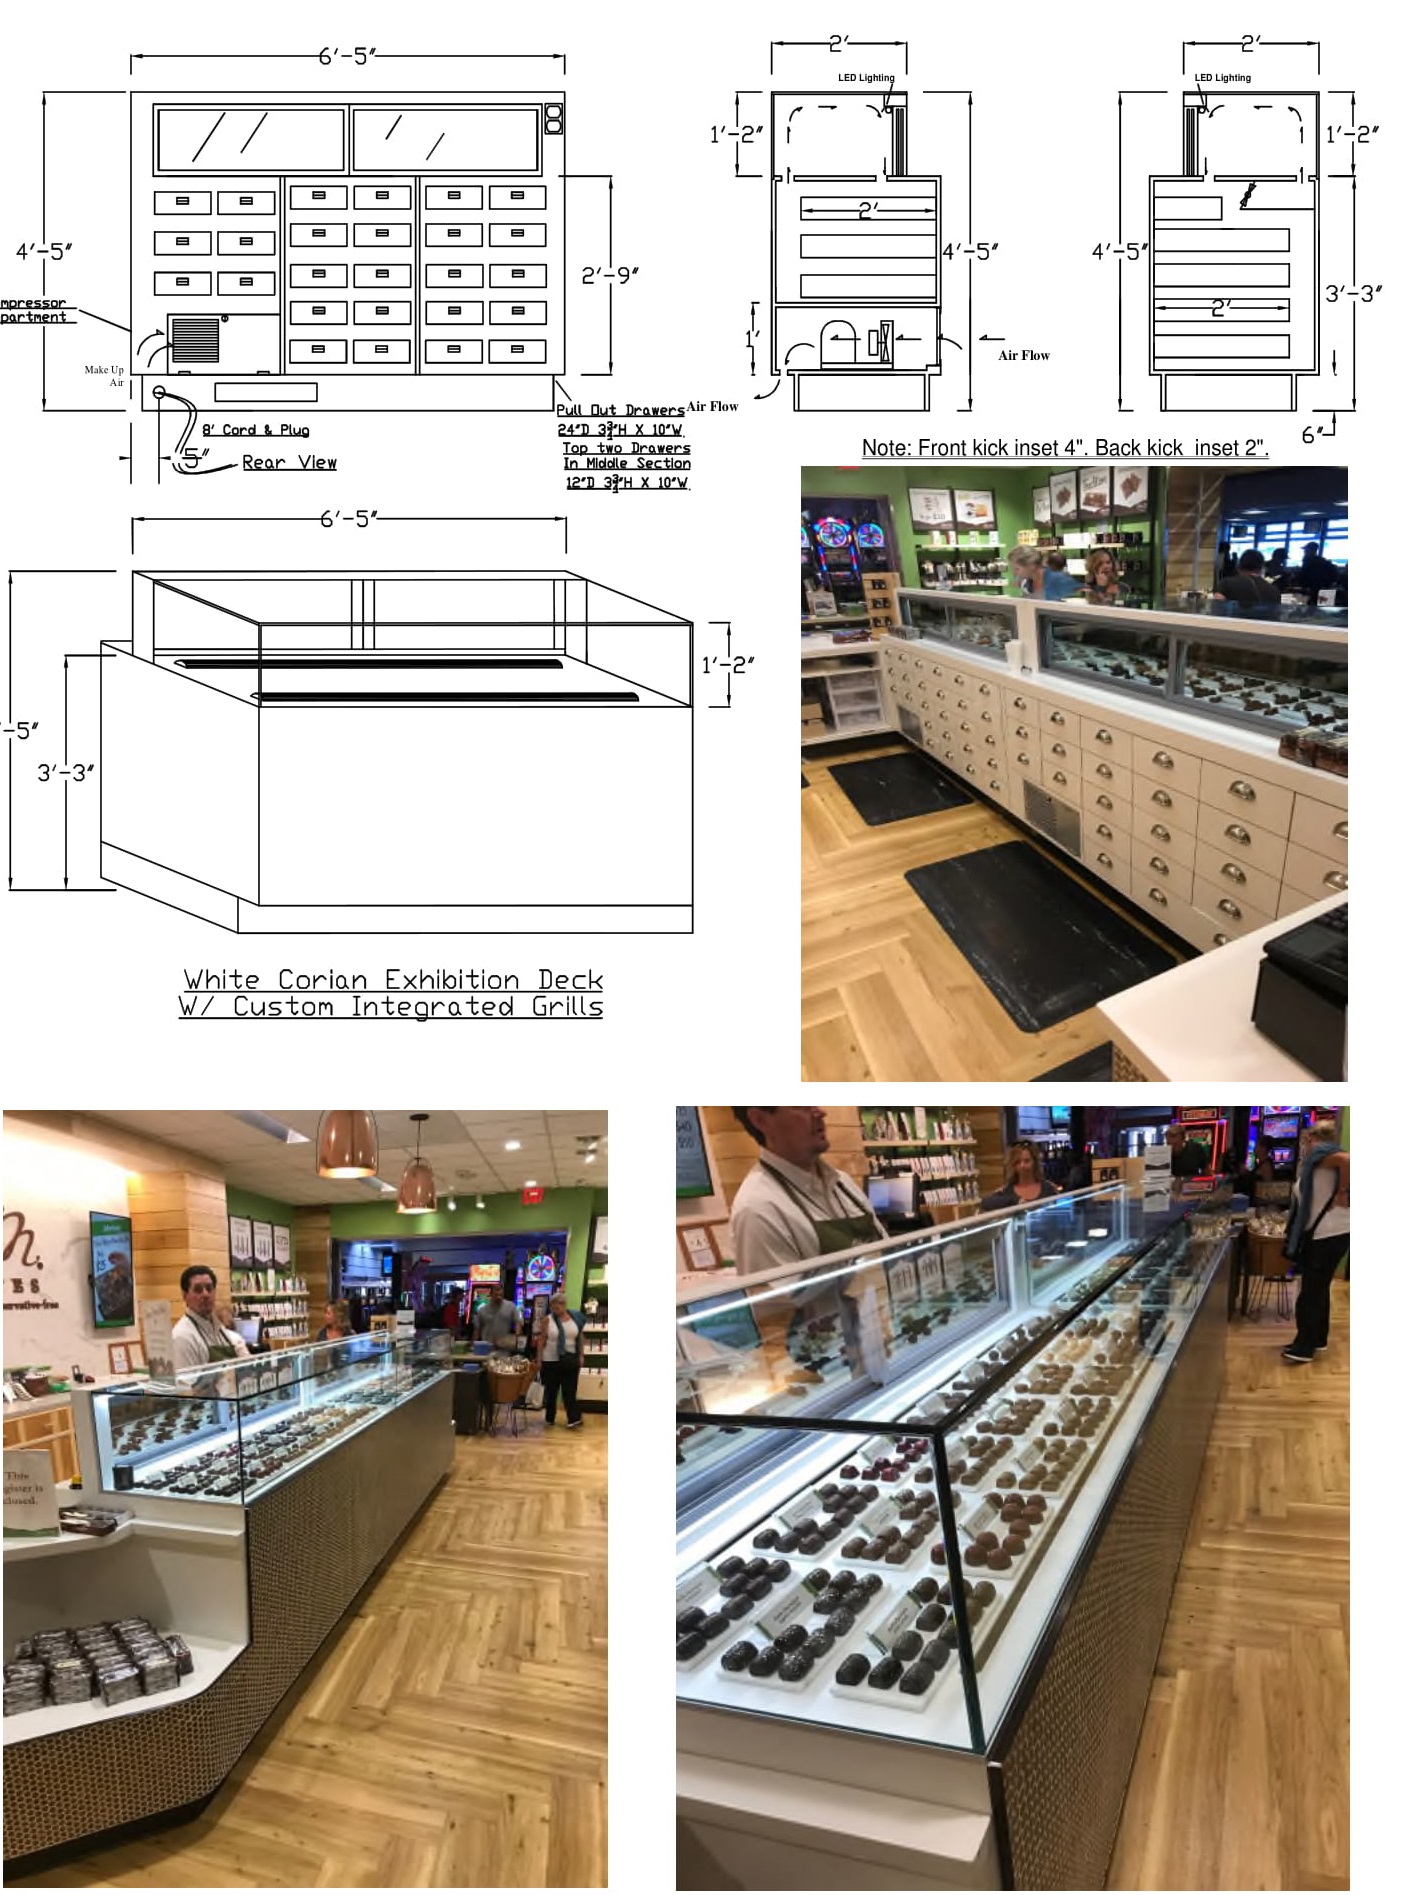 coldcore inc. helps with planning your bakery or candy store